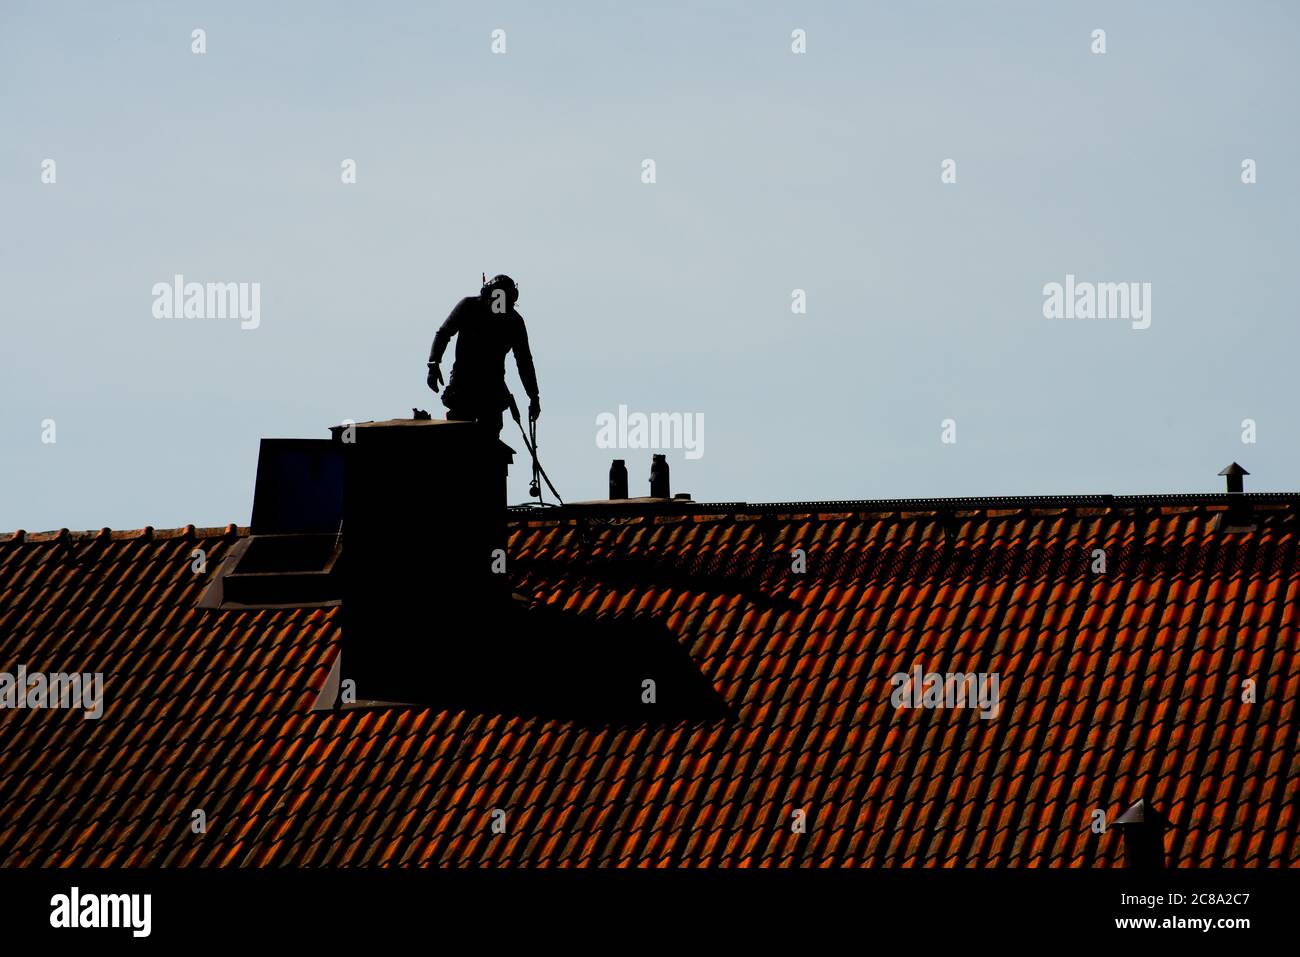 Silhouette of a chimney sweeper on top of a roof. Stock Photo